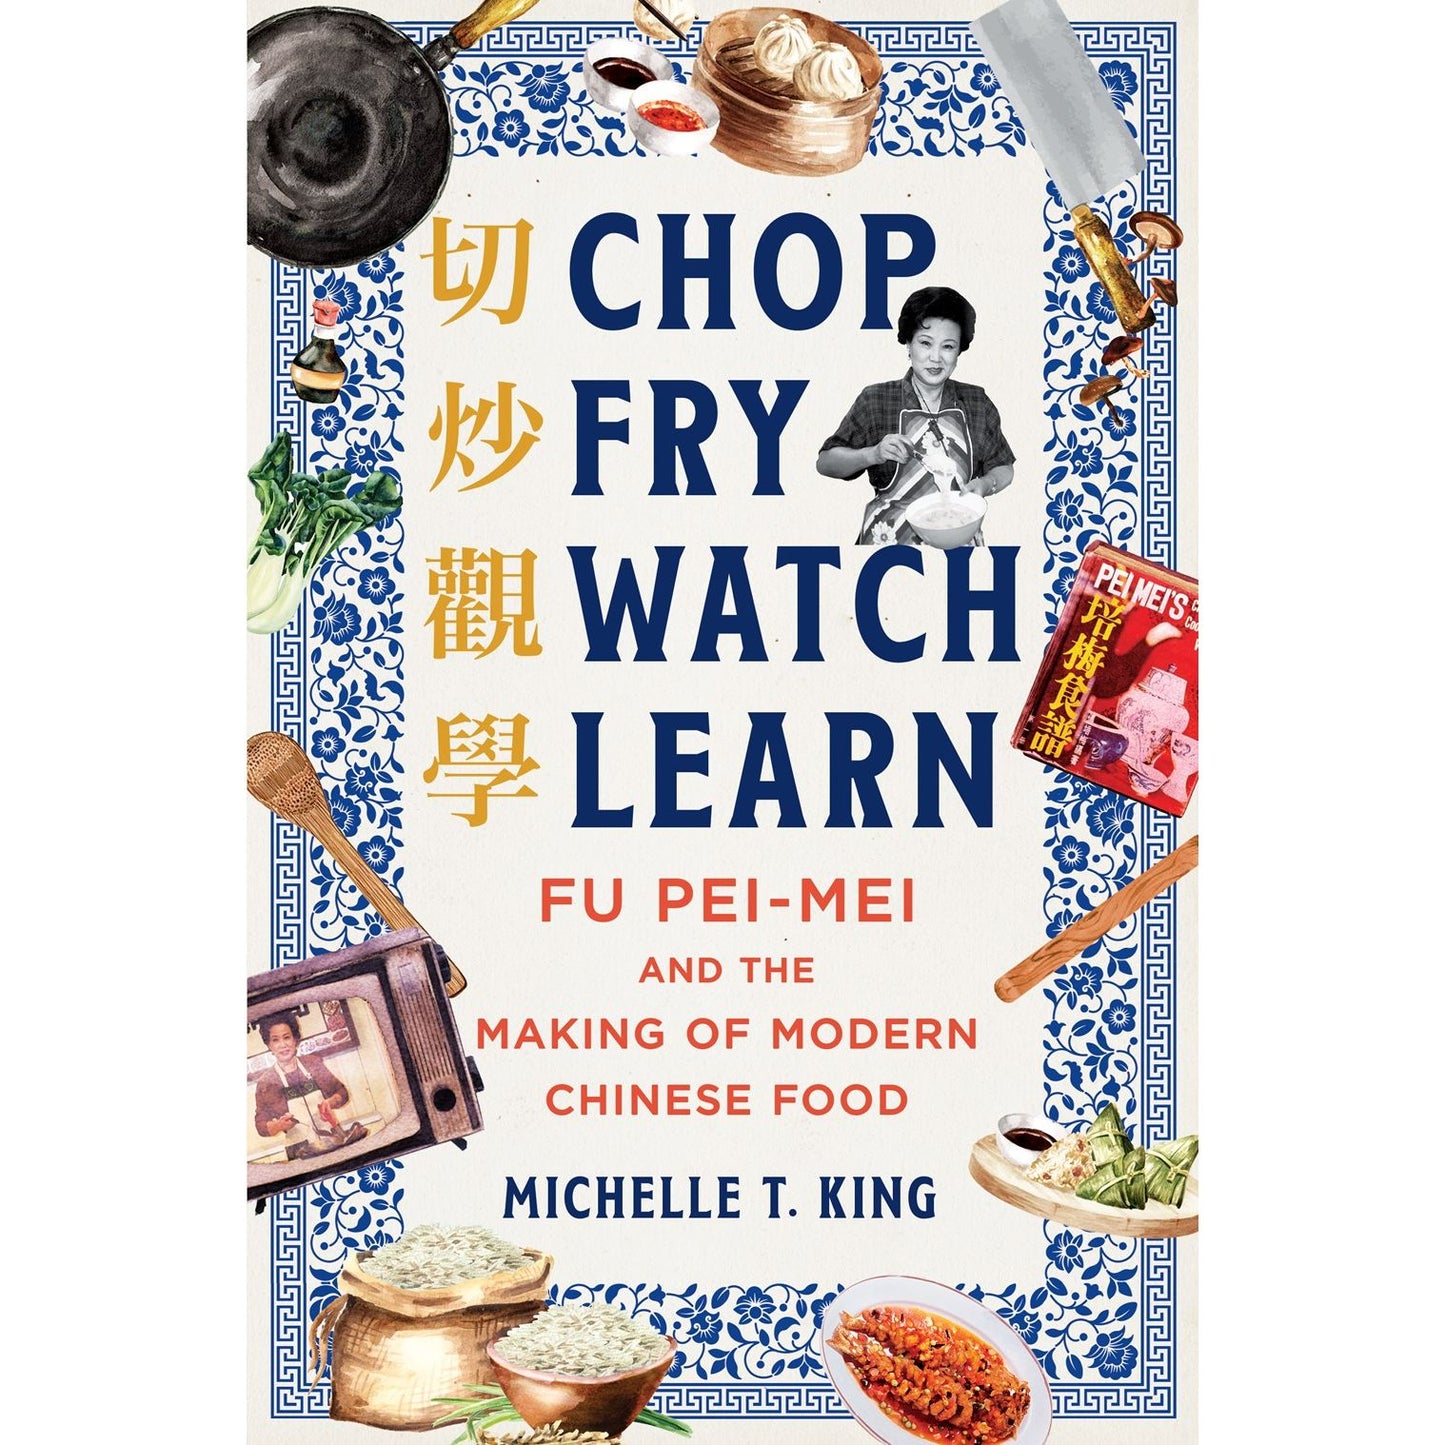 SIGNED: Chop Fry Watch Learn (Michelle T. King)